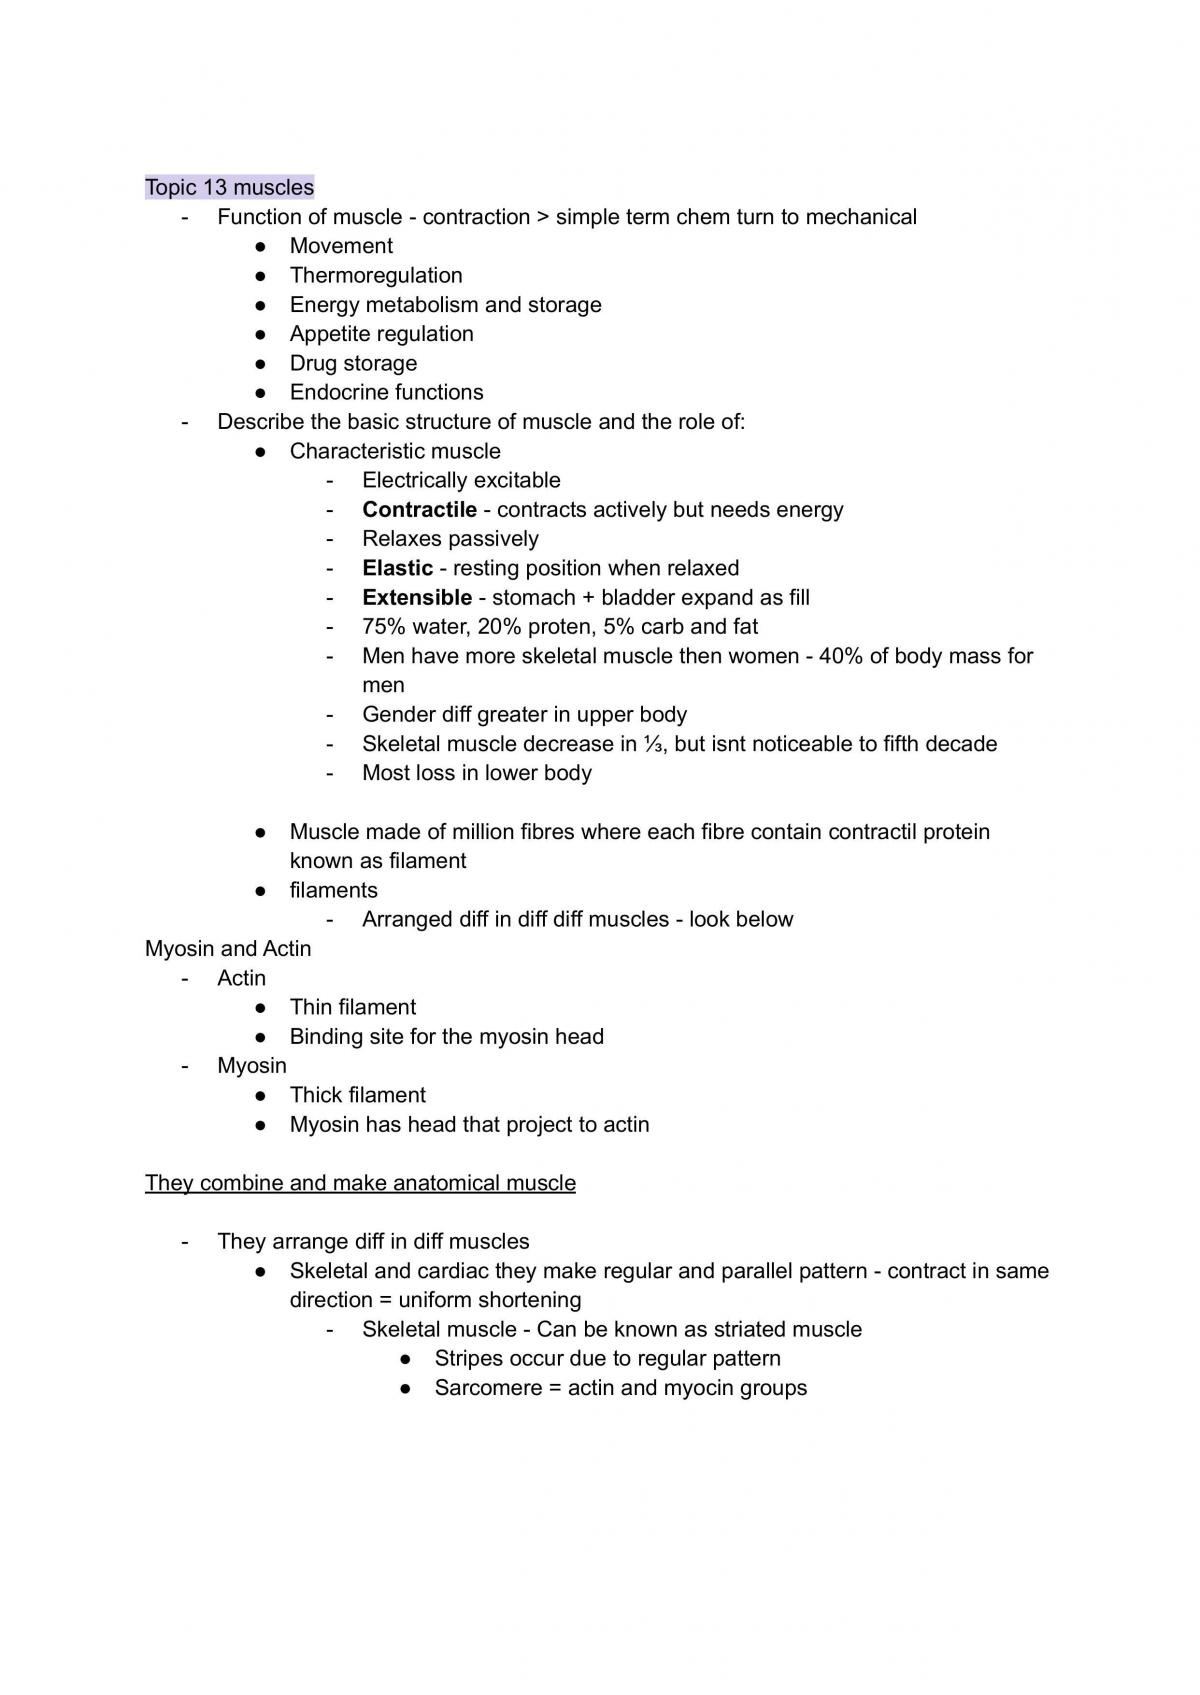 BIOL1008 Full Notes from Topics 11 to 16 - Page 12